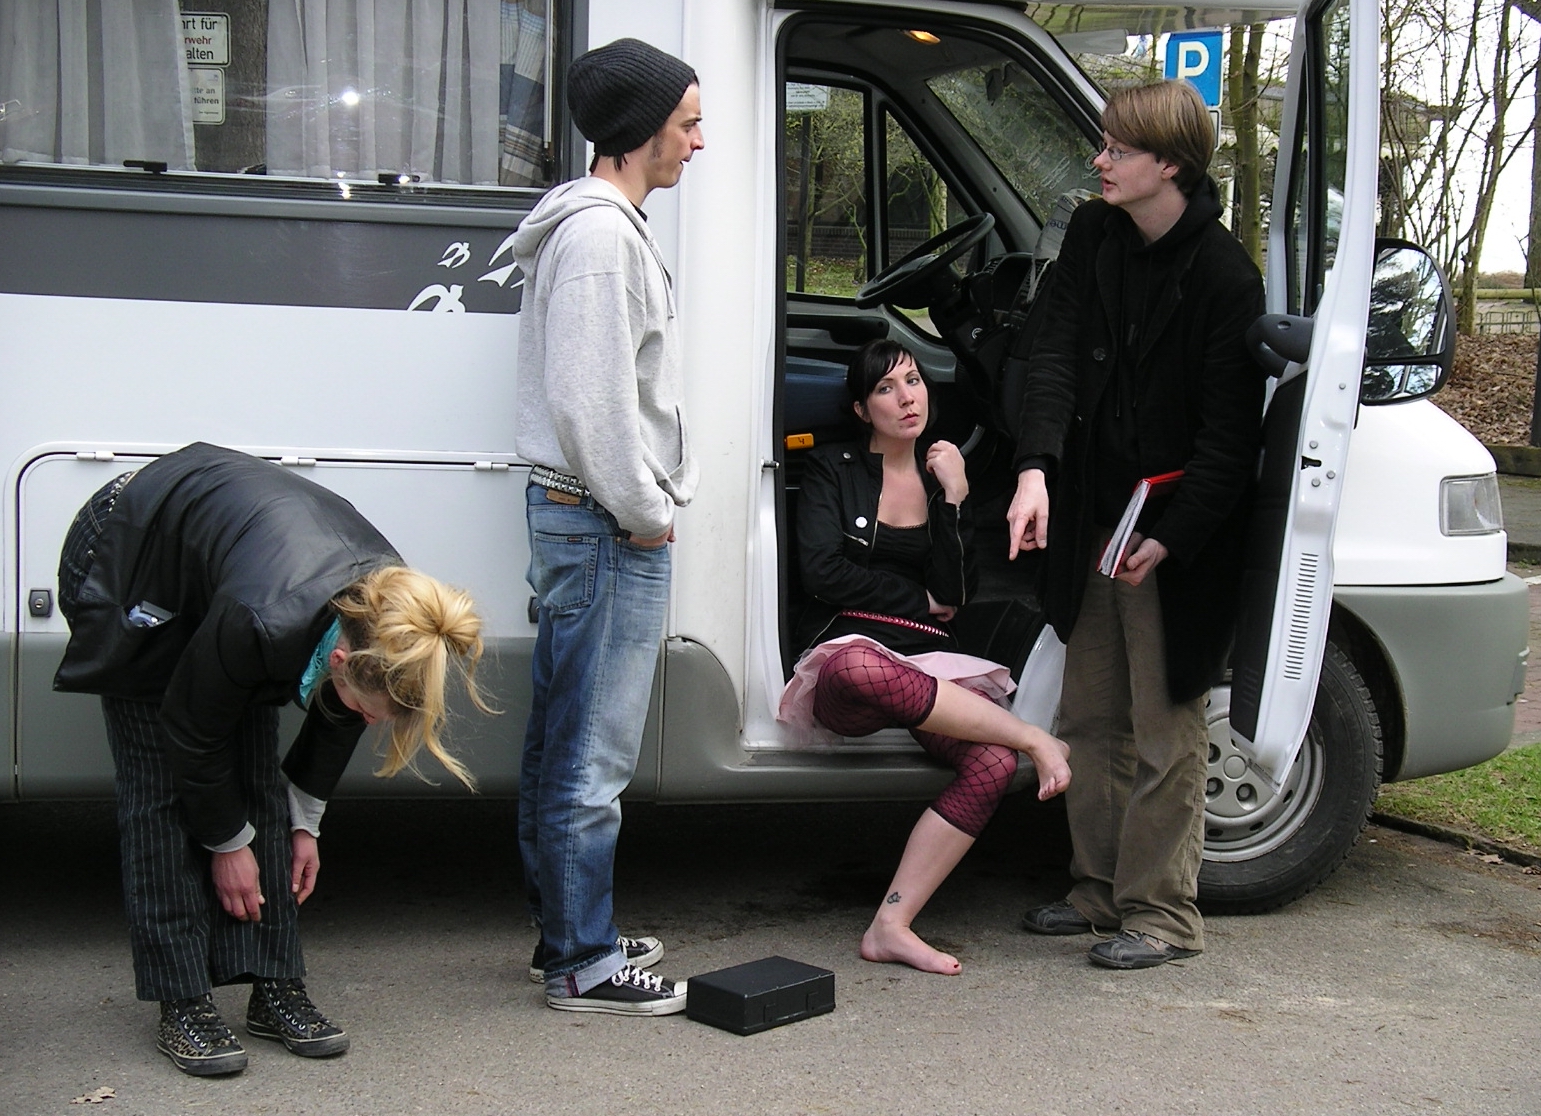 Andreas Cyrenius on the set of his 2006 feature length film Bangbus giving instructions to actors Niels Donner, Vivian Bullert and Sybille Weiser.